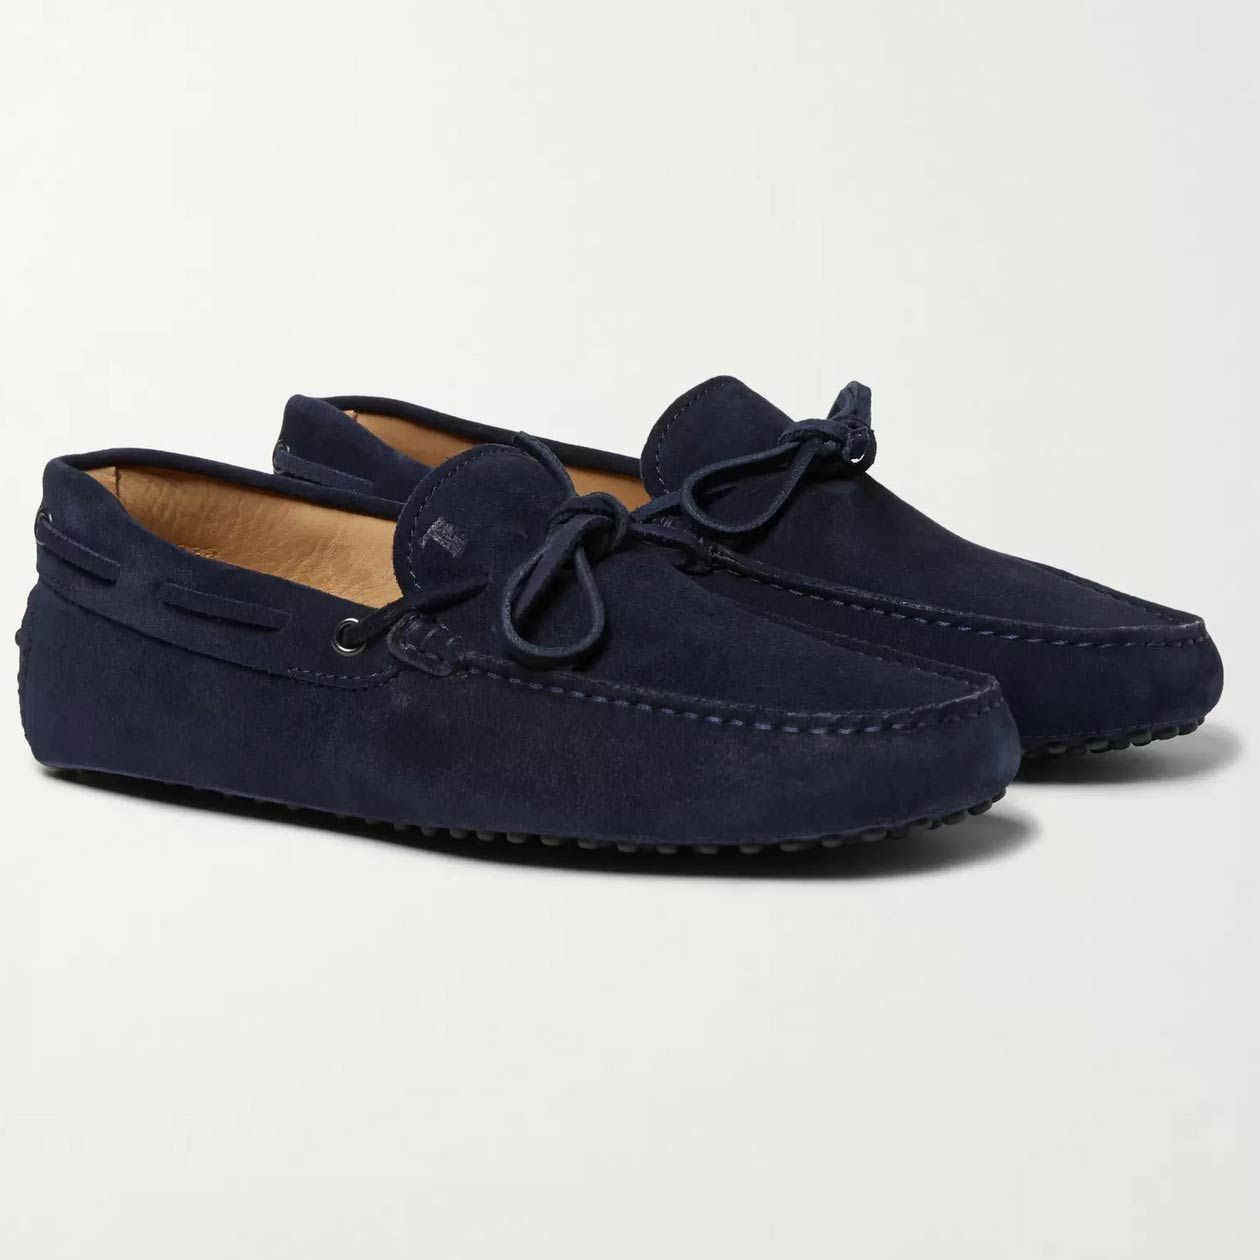 Mens Canvas Boat Shoes Plimsolls Pumps Trainers Size 6 7 8 9 10 11 Loafers Driving Summer Casuals Slip On Or Lace up